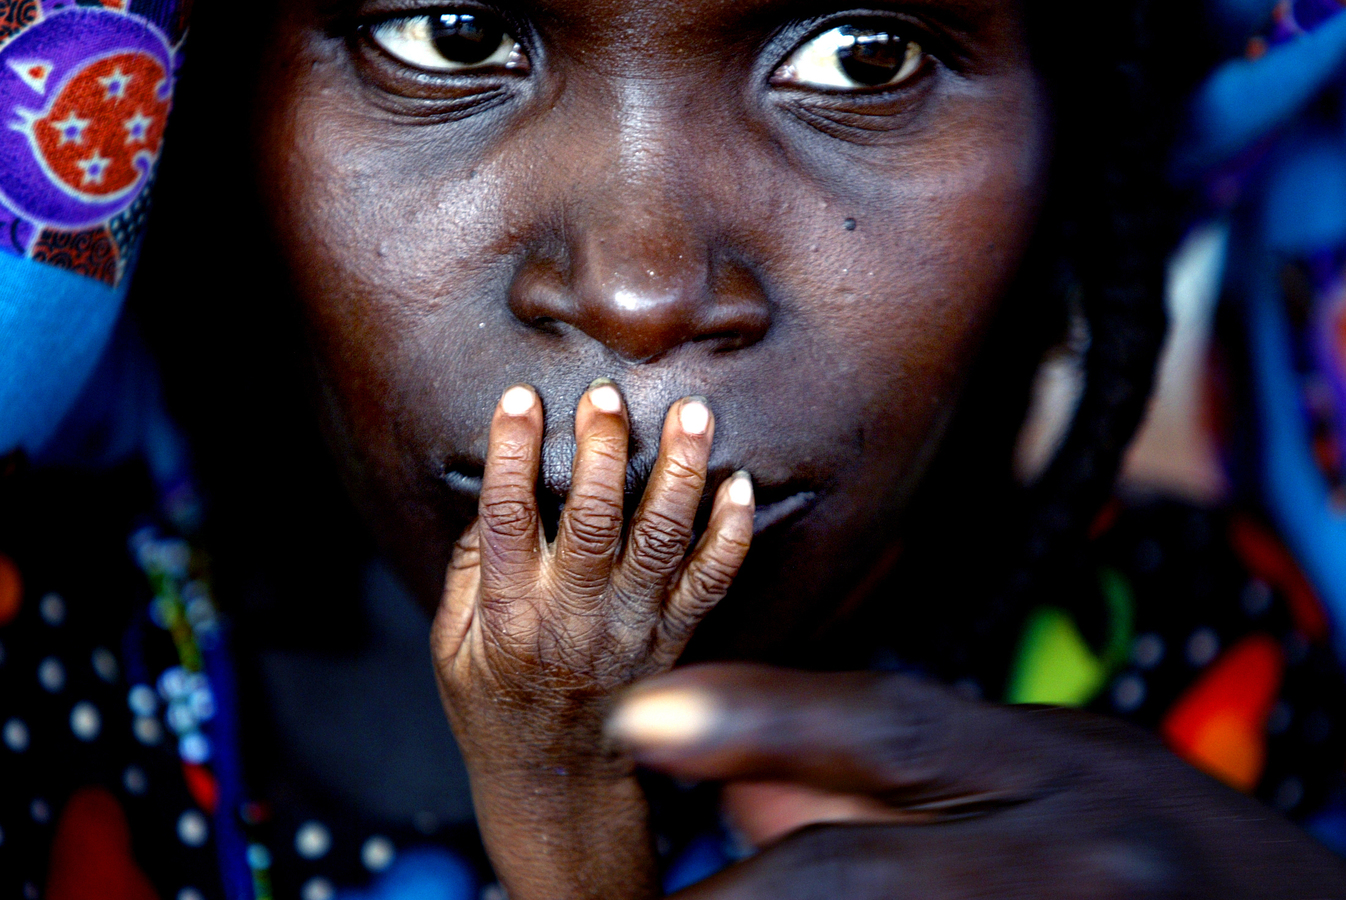 The fingers of emaciated one-year-old Alassa Galisou are pressed against the lips of his mother Fatou Ousseini at an emergency feeding clinic in Tahoua, Niger, August 1, 2005. Hardly any of the pledges announced at the G8 summit have yet translated i